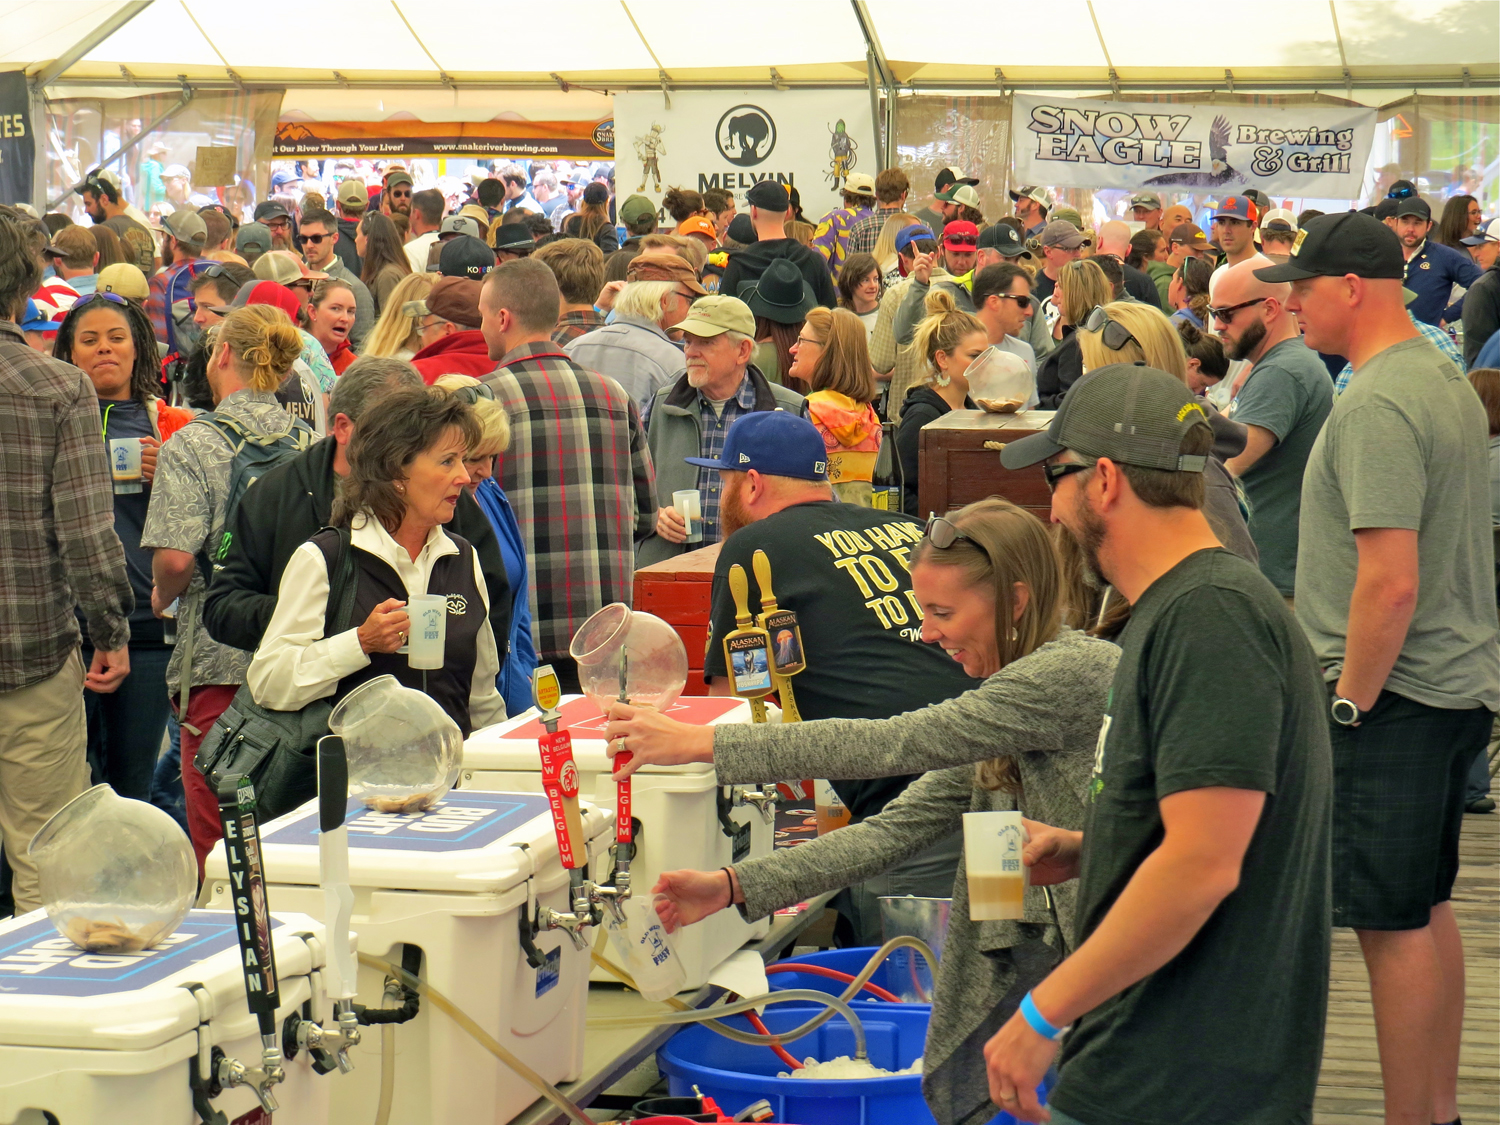 The Old West Brew Fest rides back into Jackson Hole on Saturday, May 26, during Old West Days weekend with guests sipping the best craft beers from regional brewers.